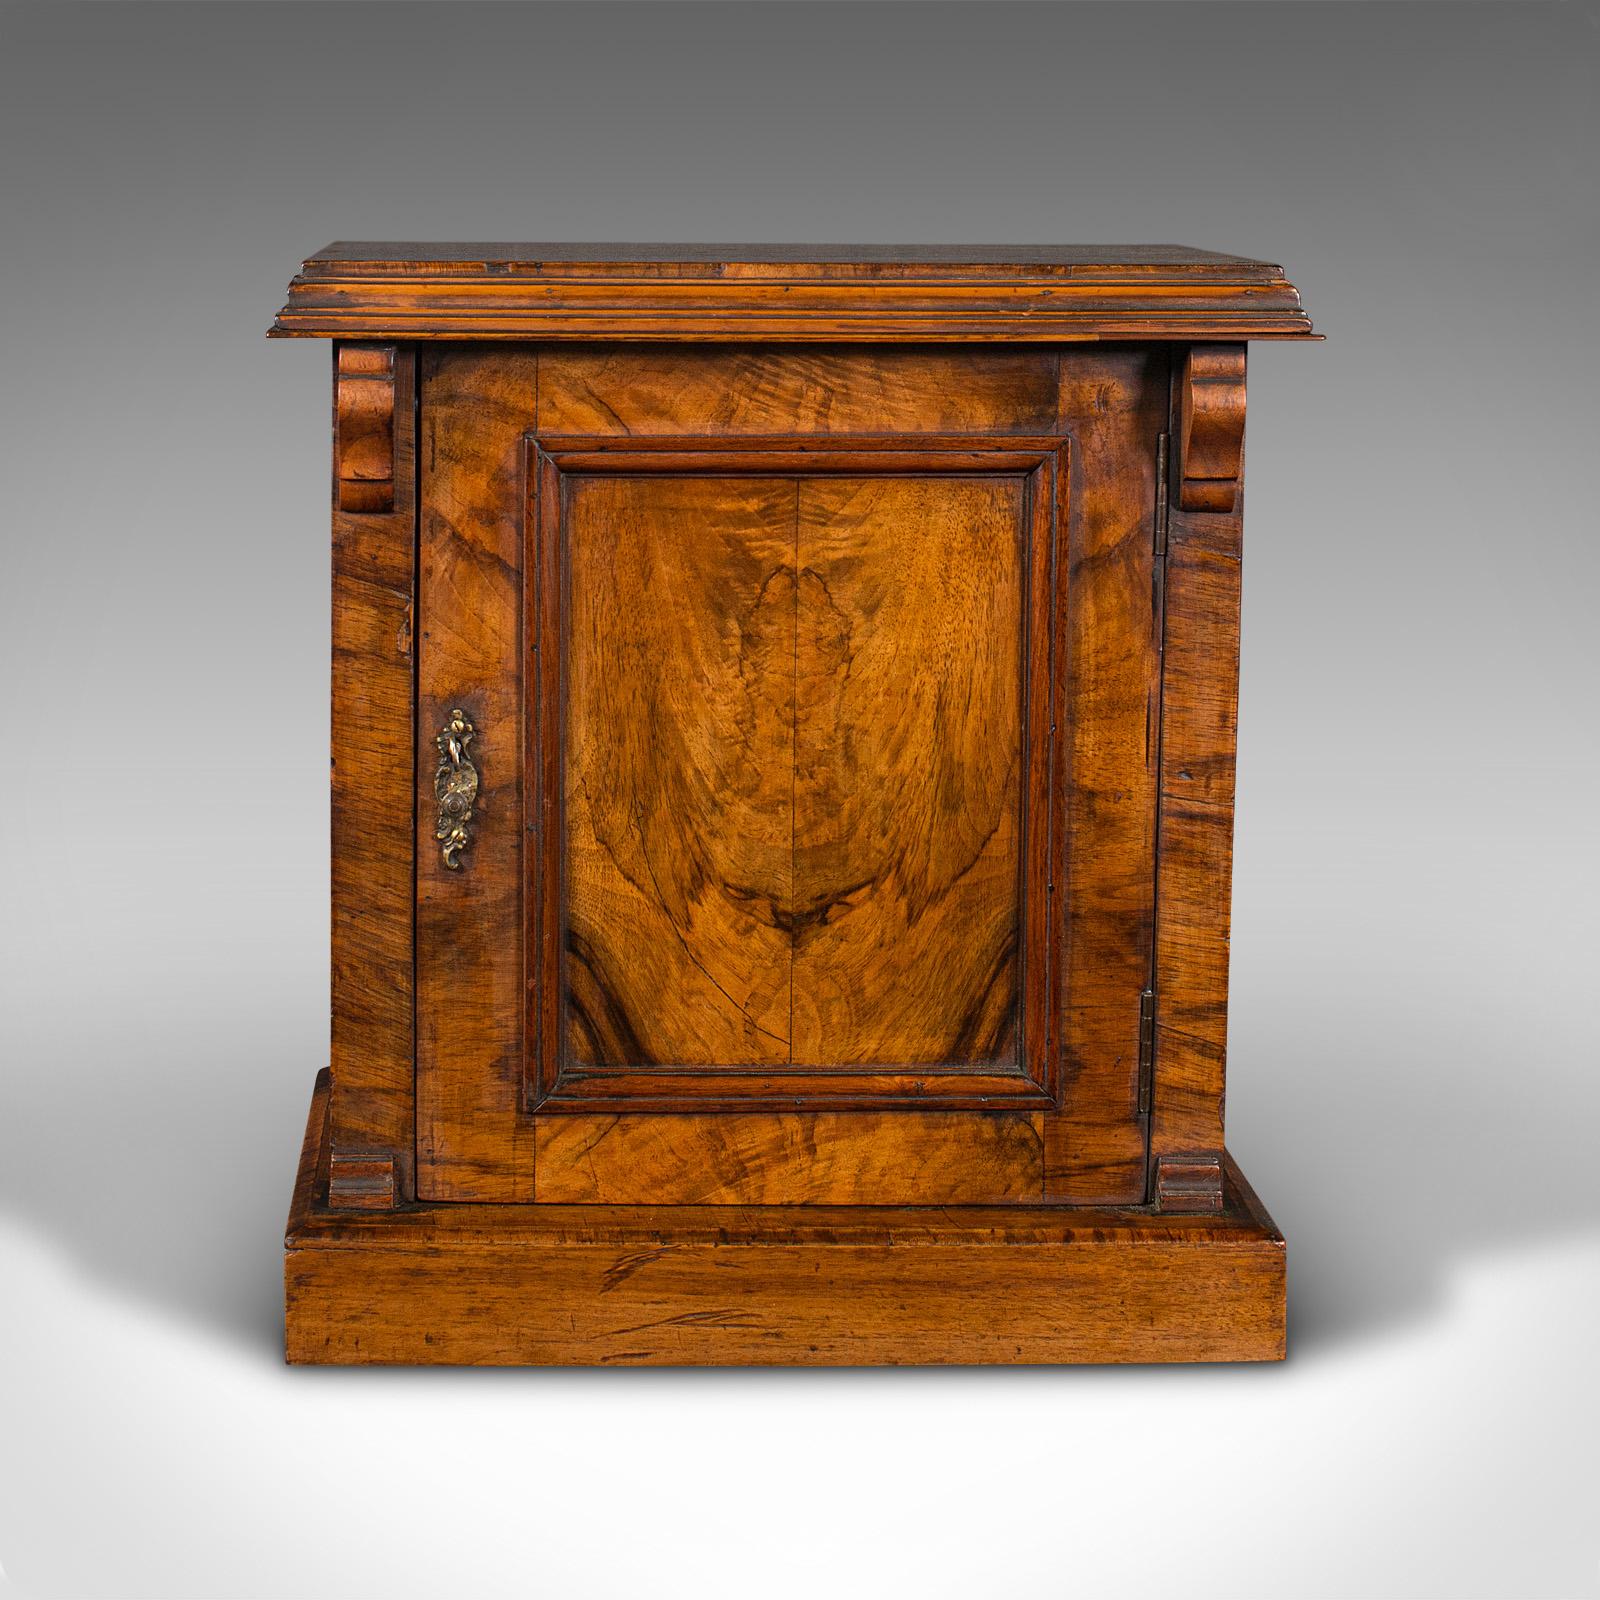 This is a small antique apprentice's cabinet. An English, Burr walnut book-matched desk top, or wall cupboard, dating to the Victorian period, circa 1880.

Striking appearance to this delightfully petite cabinet
Displays a desirable aged patina